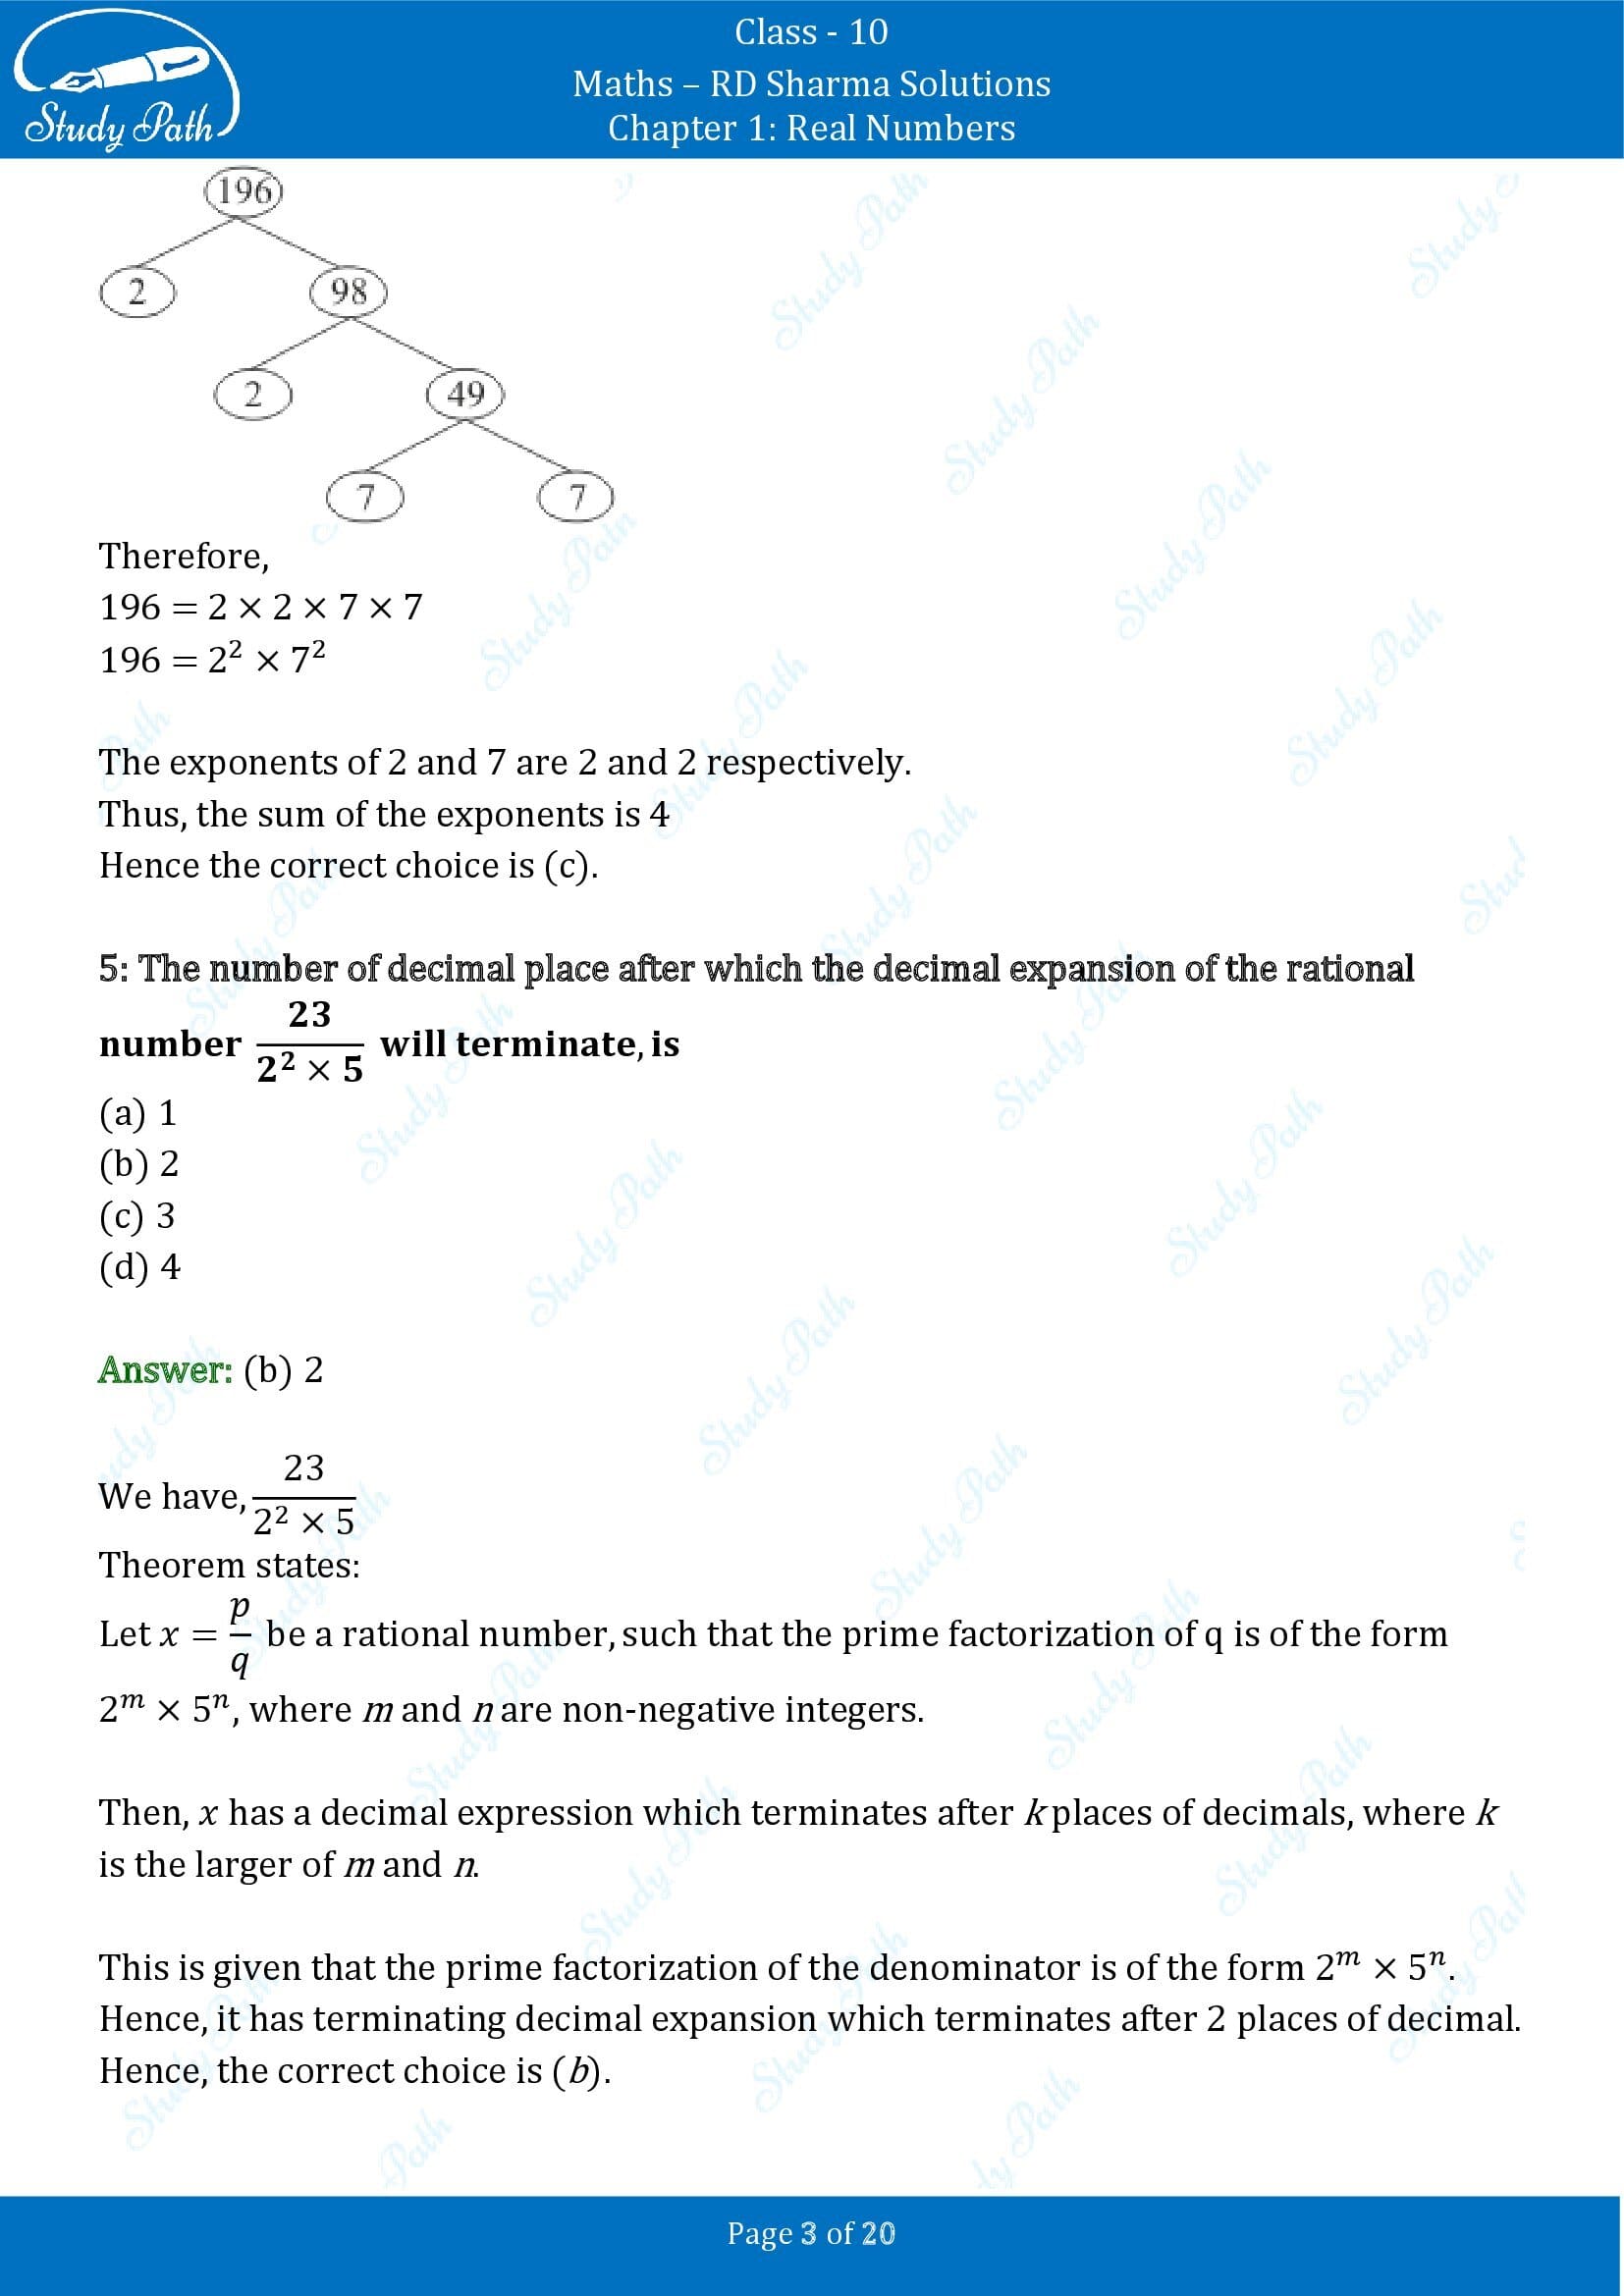 RD Sharma Solutions Class 10 Chapter 1 Real Numbers Multiple Choice Questions MCQs 00003